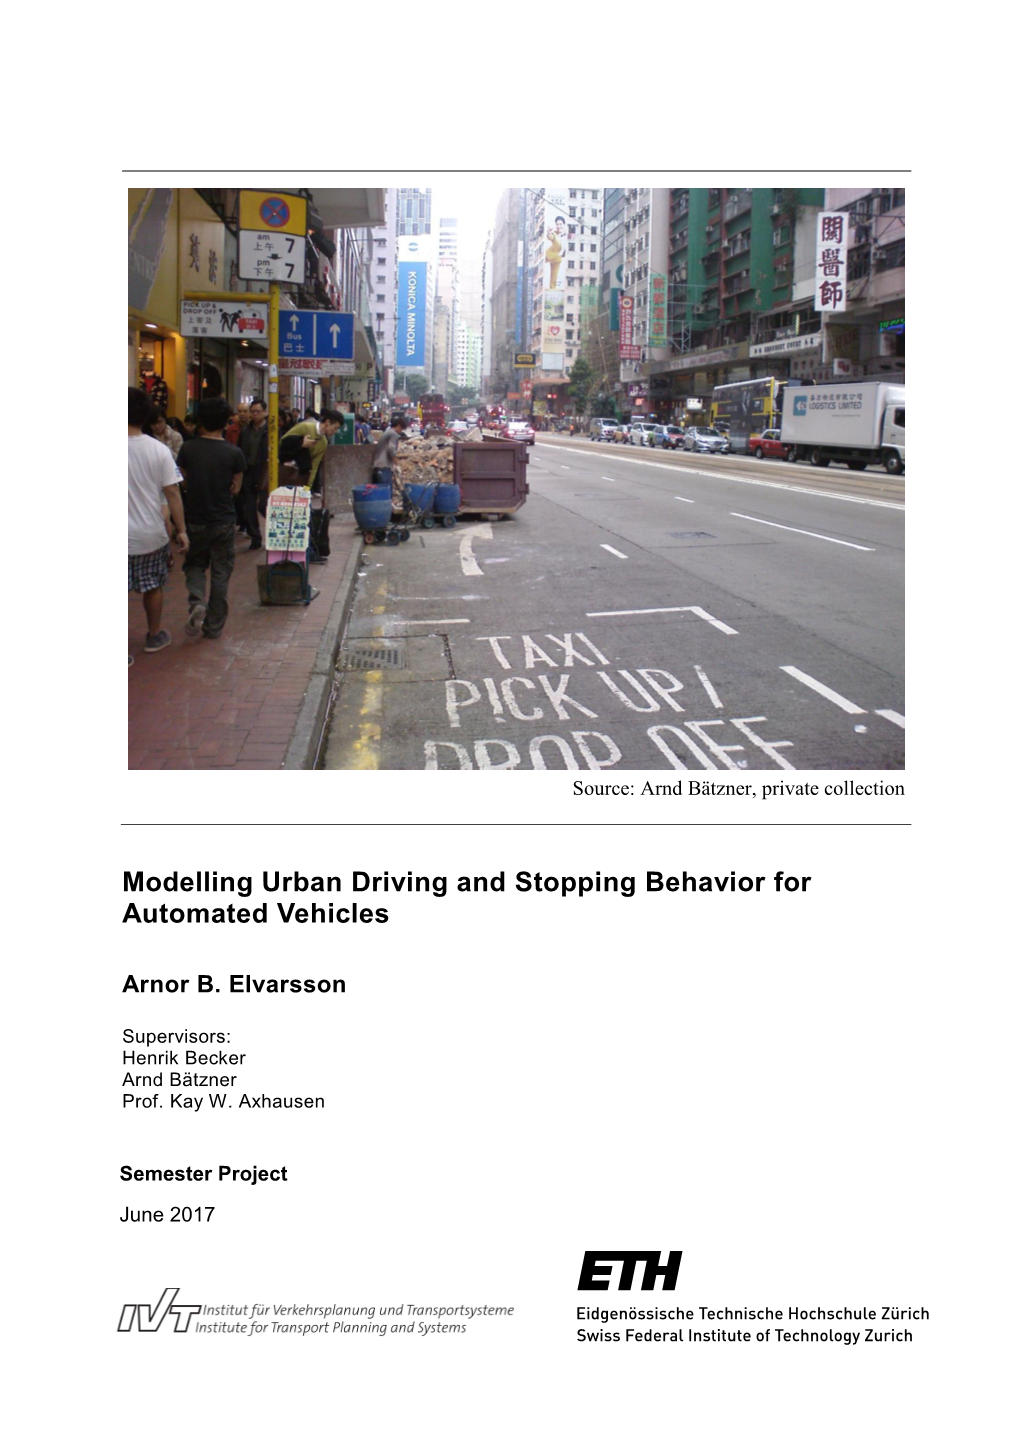 Modelling Urban Driving and Stopping Behaviour for Automated Vehicles